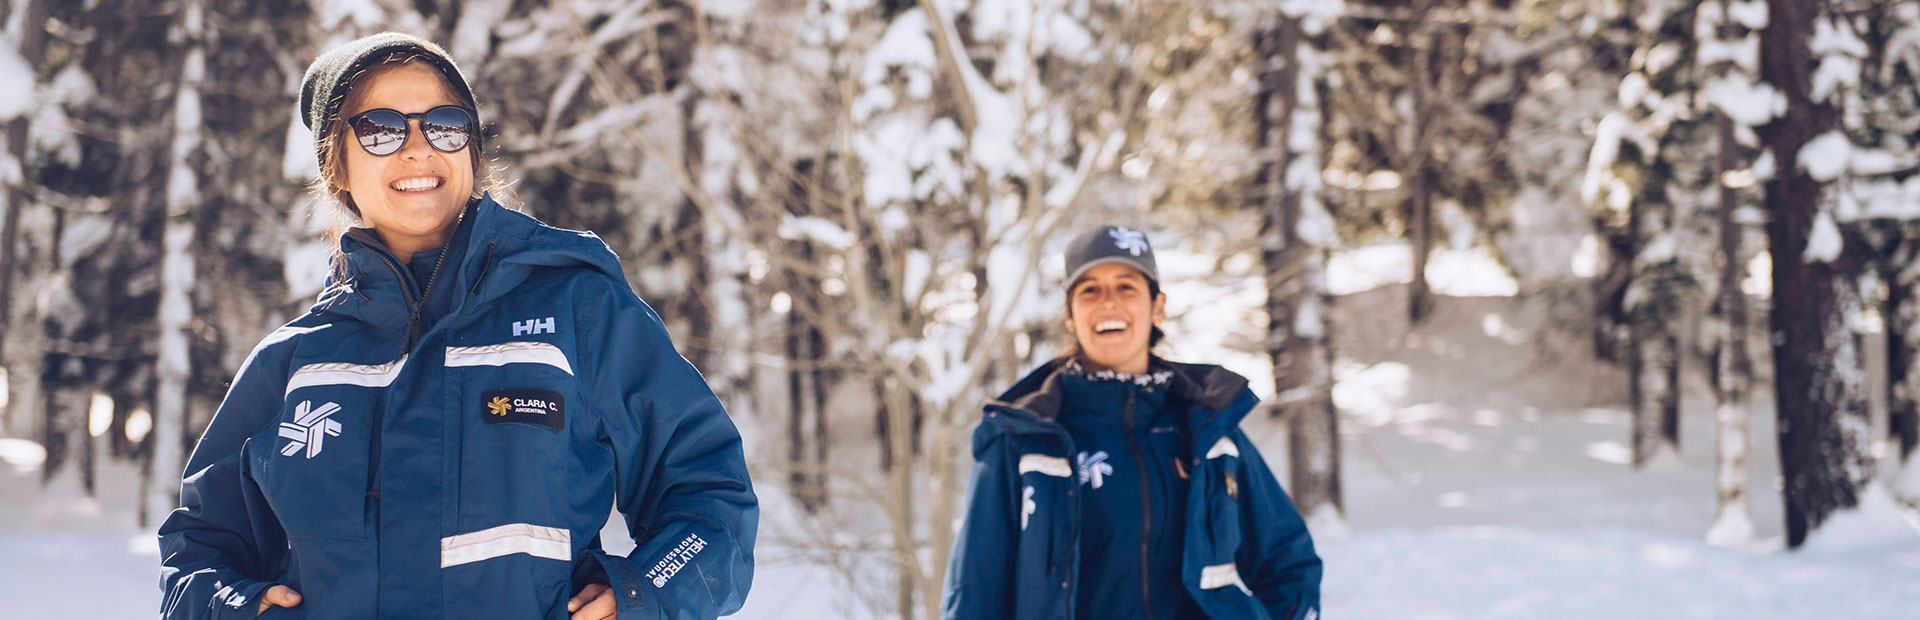 Two employees wearing ski jackets smiling with snowy trees in the background
